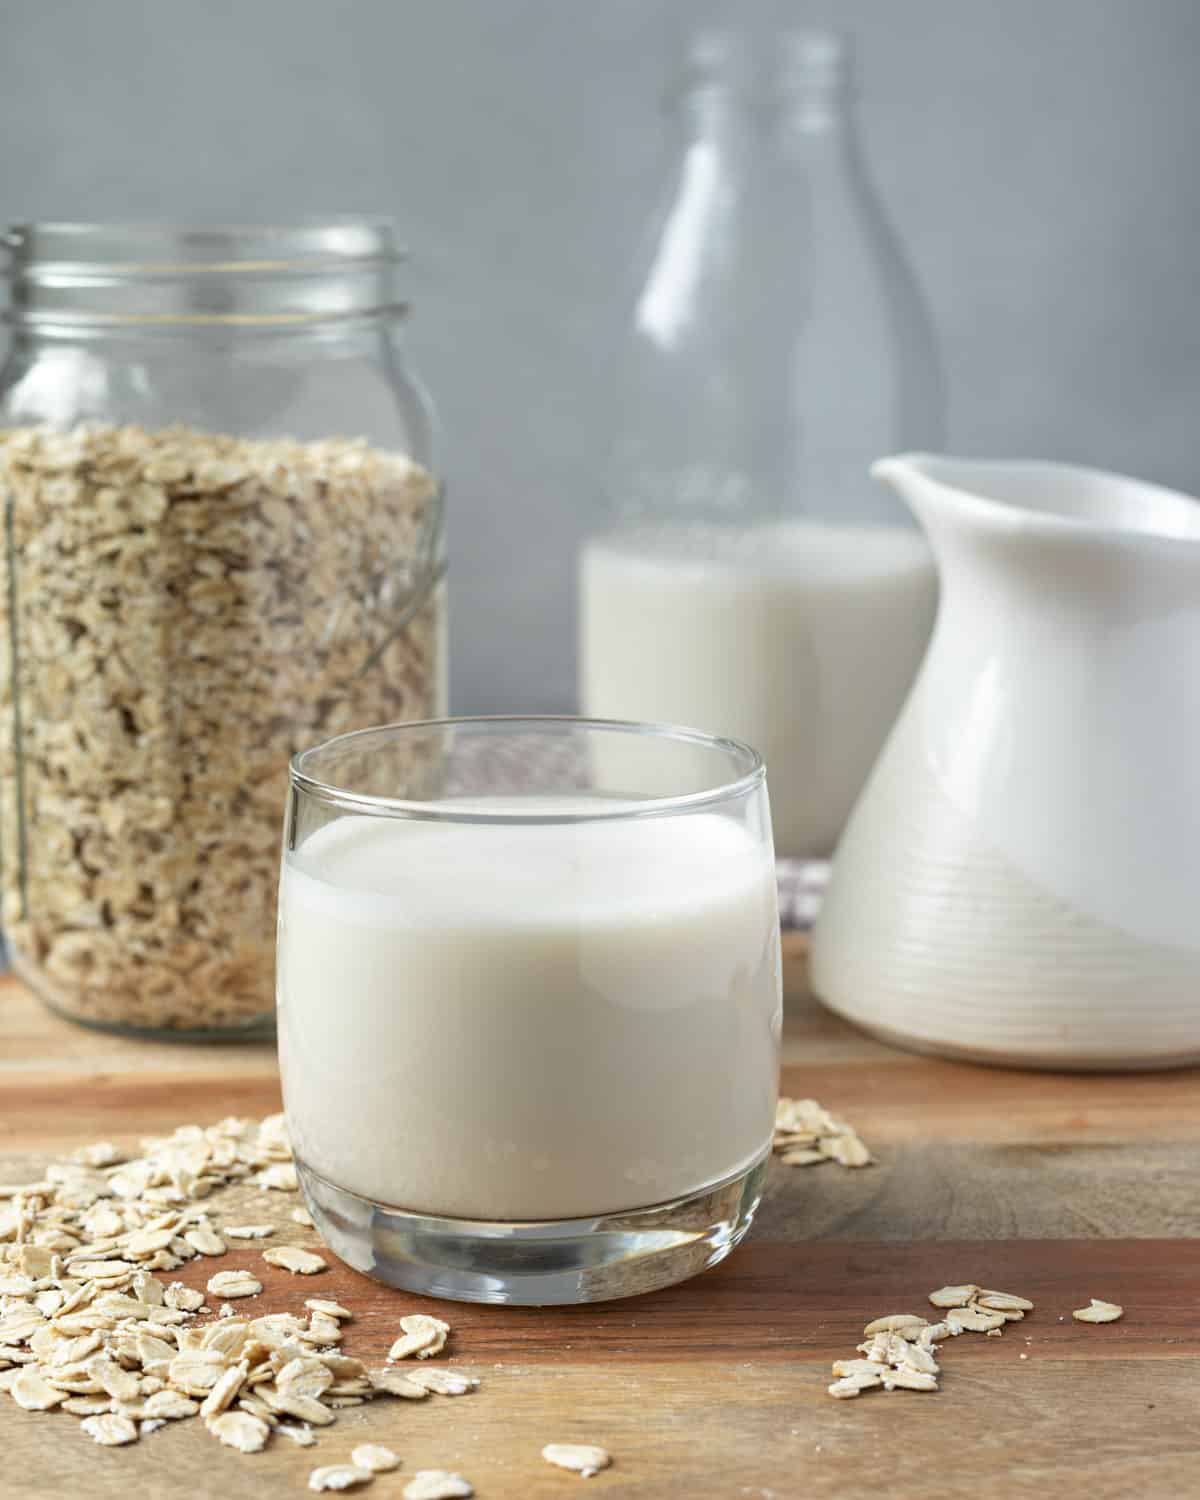 A glass of homemade oat milk on a wood board with a glass jar of milk in the background.